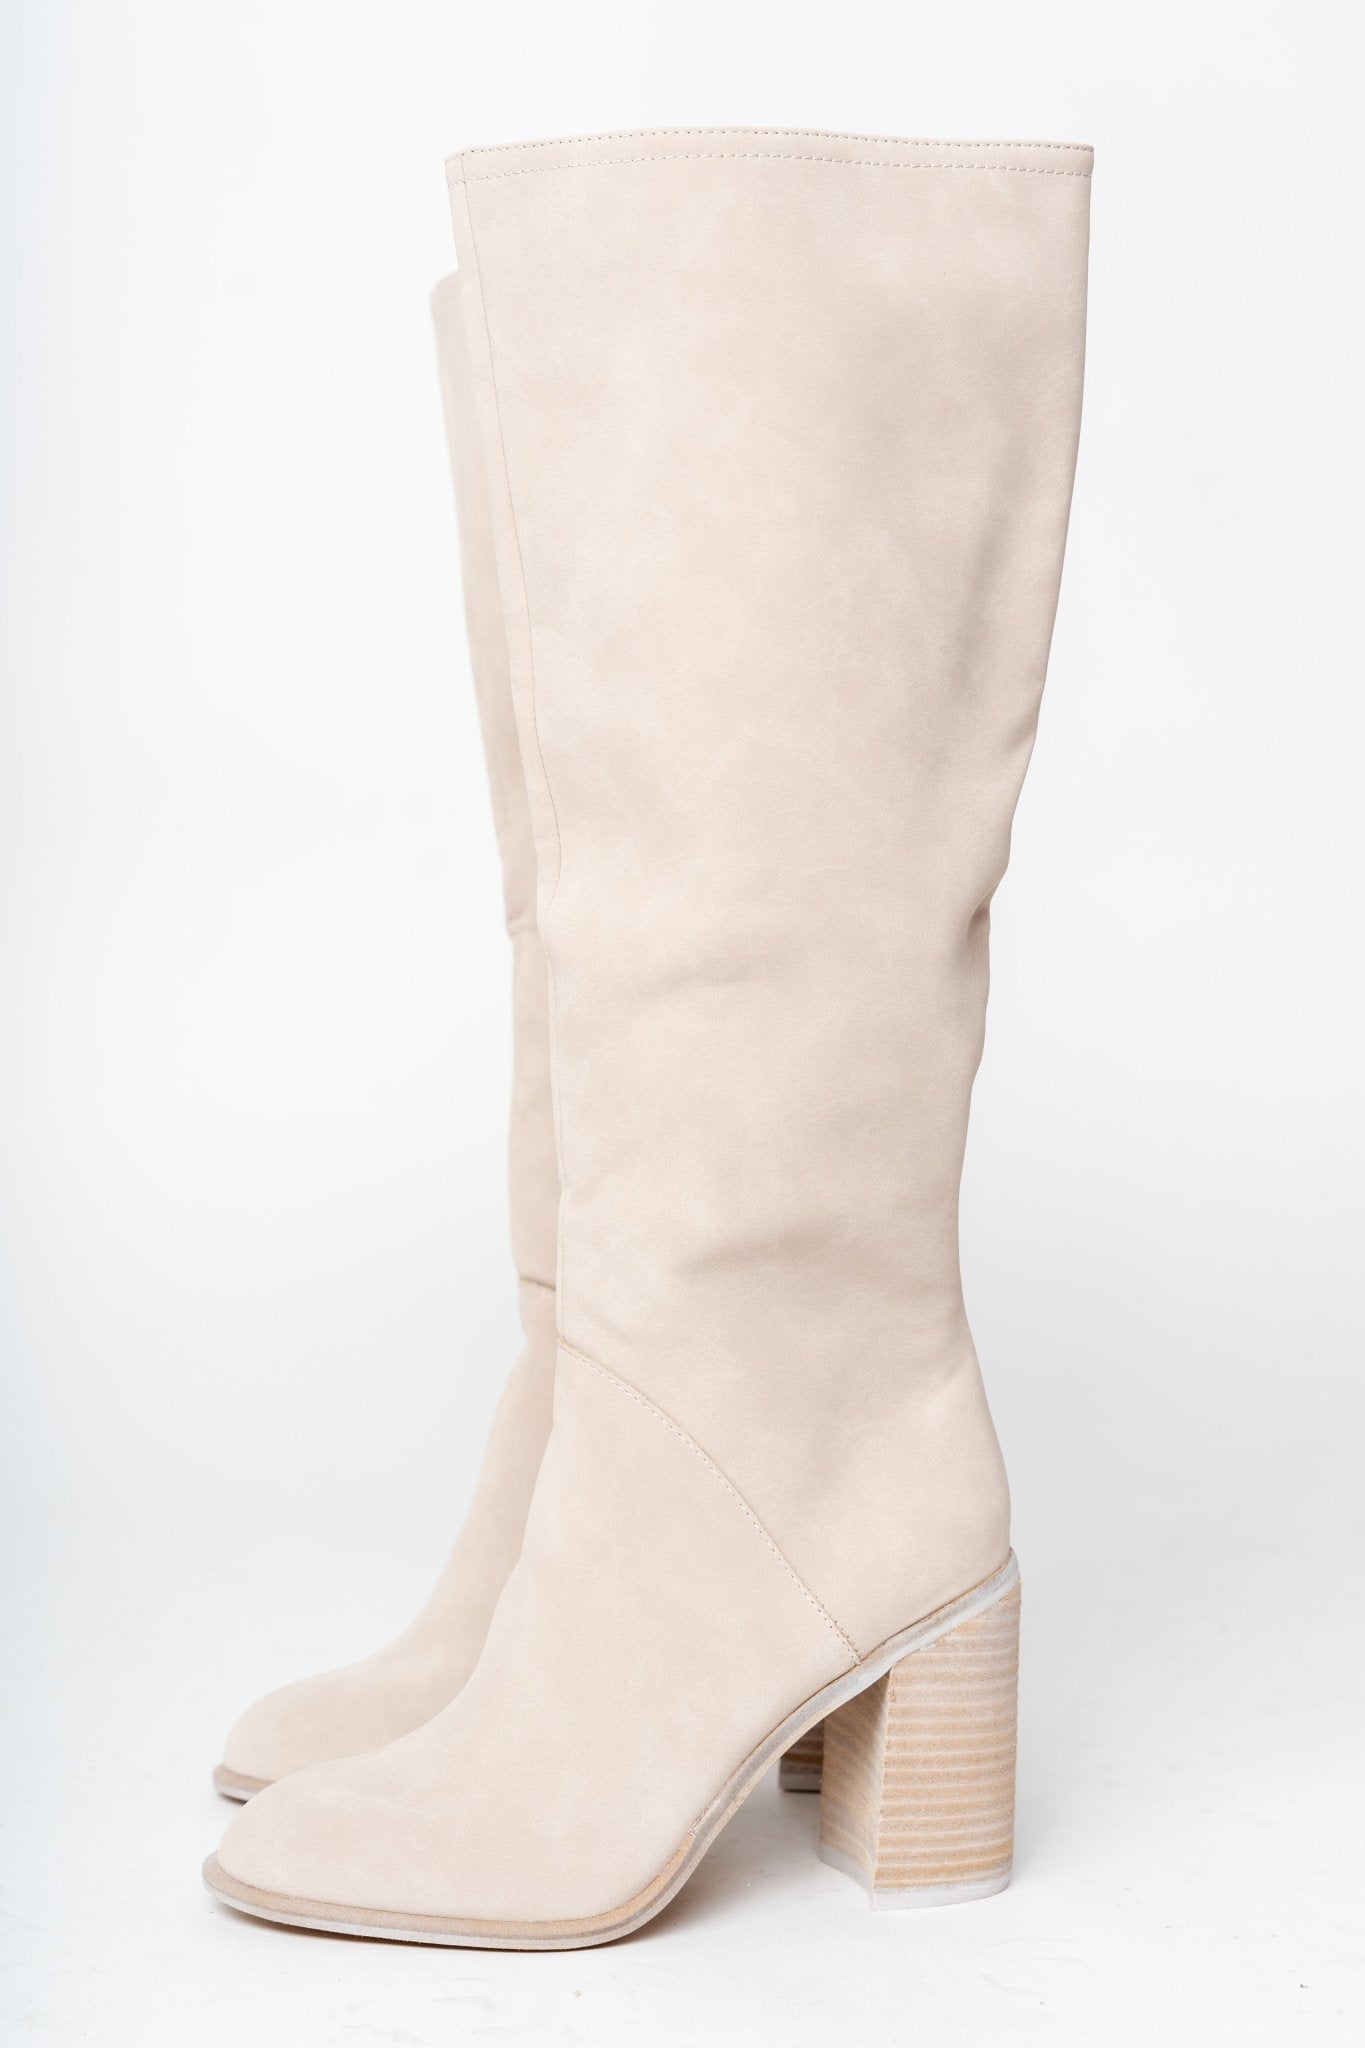 Shiloh knee high boot light grey - Affordable shoes - Boutique Shoes at Lush Fashion Lounge Boutique in Oklahoma City